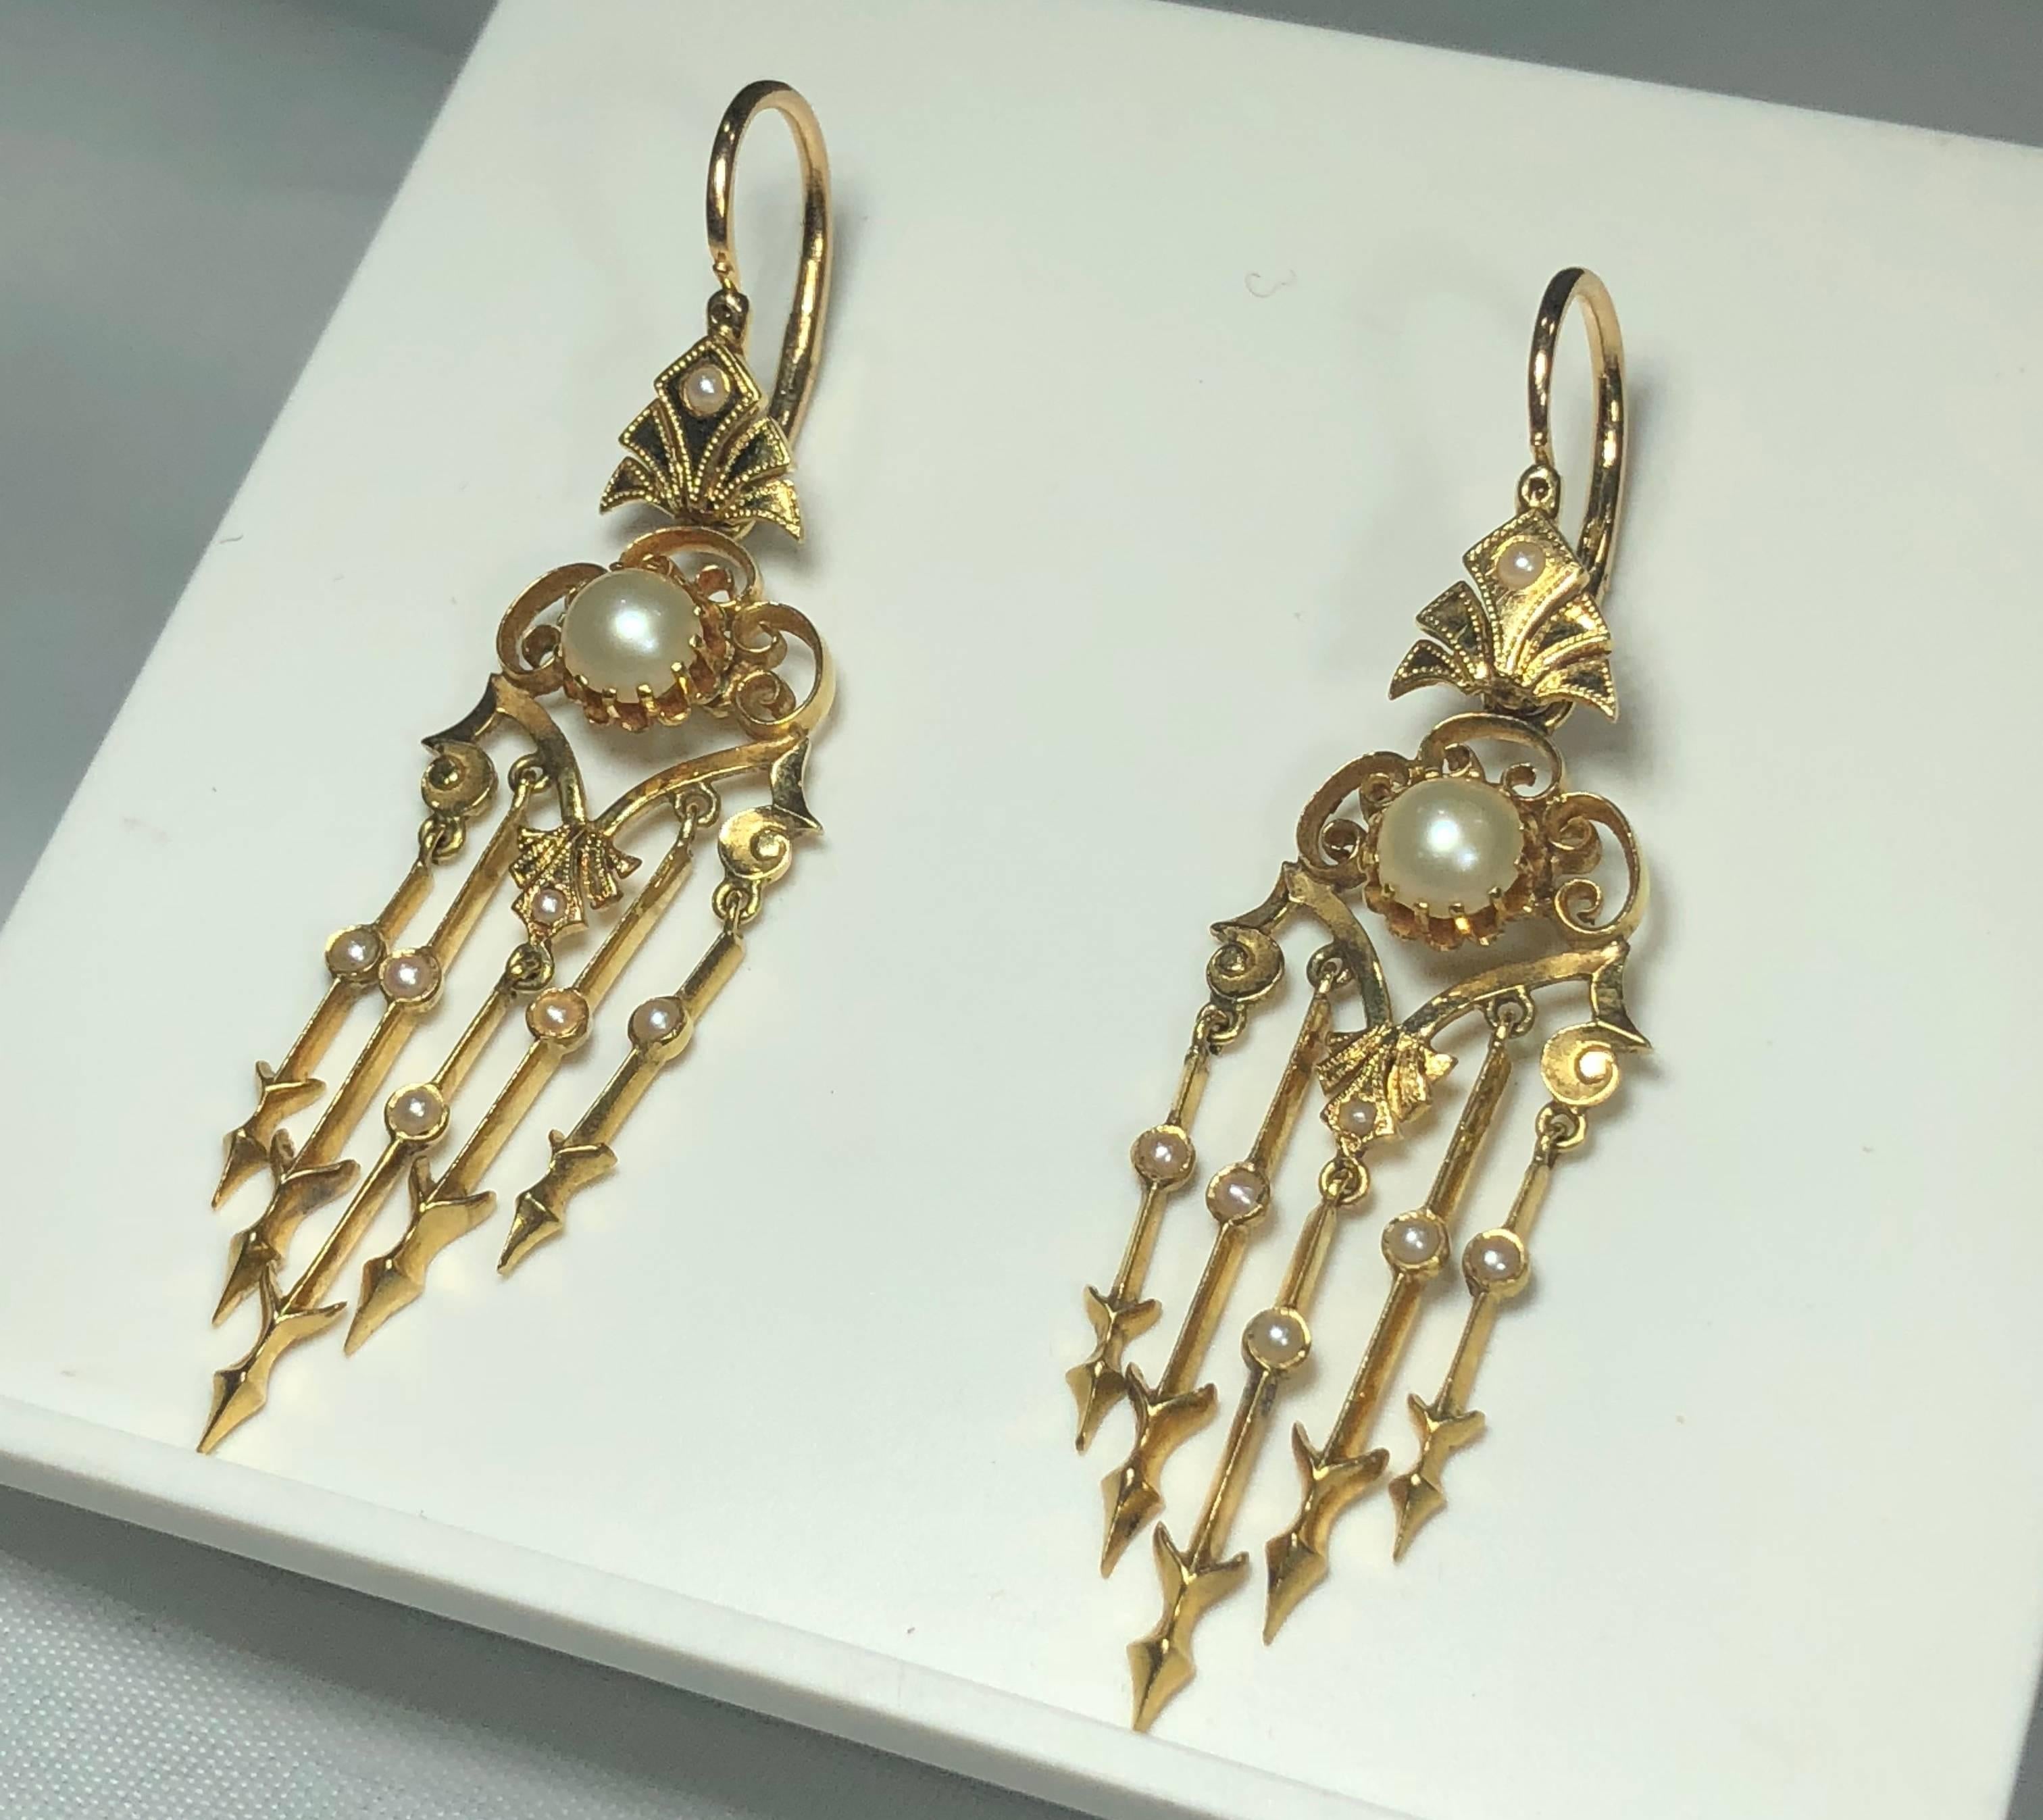 Antique Victorian 18 Karat Natural Pearl and Seed Pearl Chandelier Earrings In Excellent Condition For Sale In Mansfield, OH